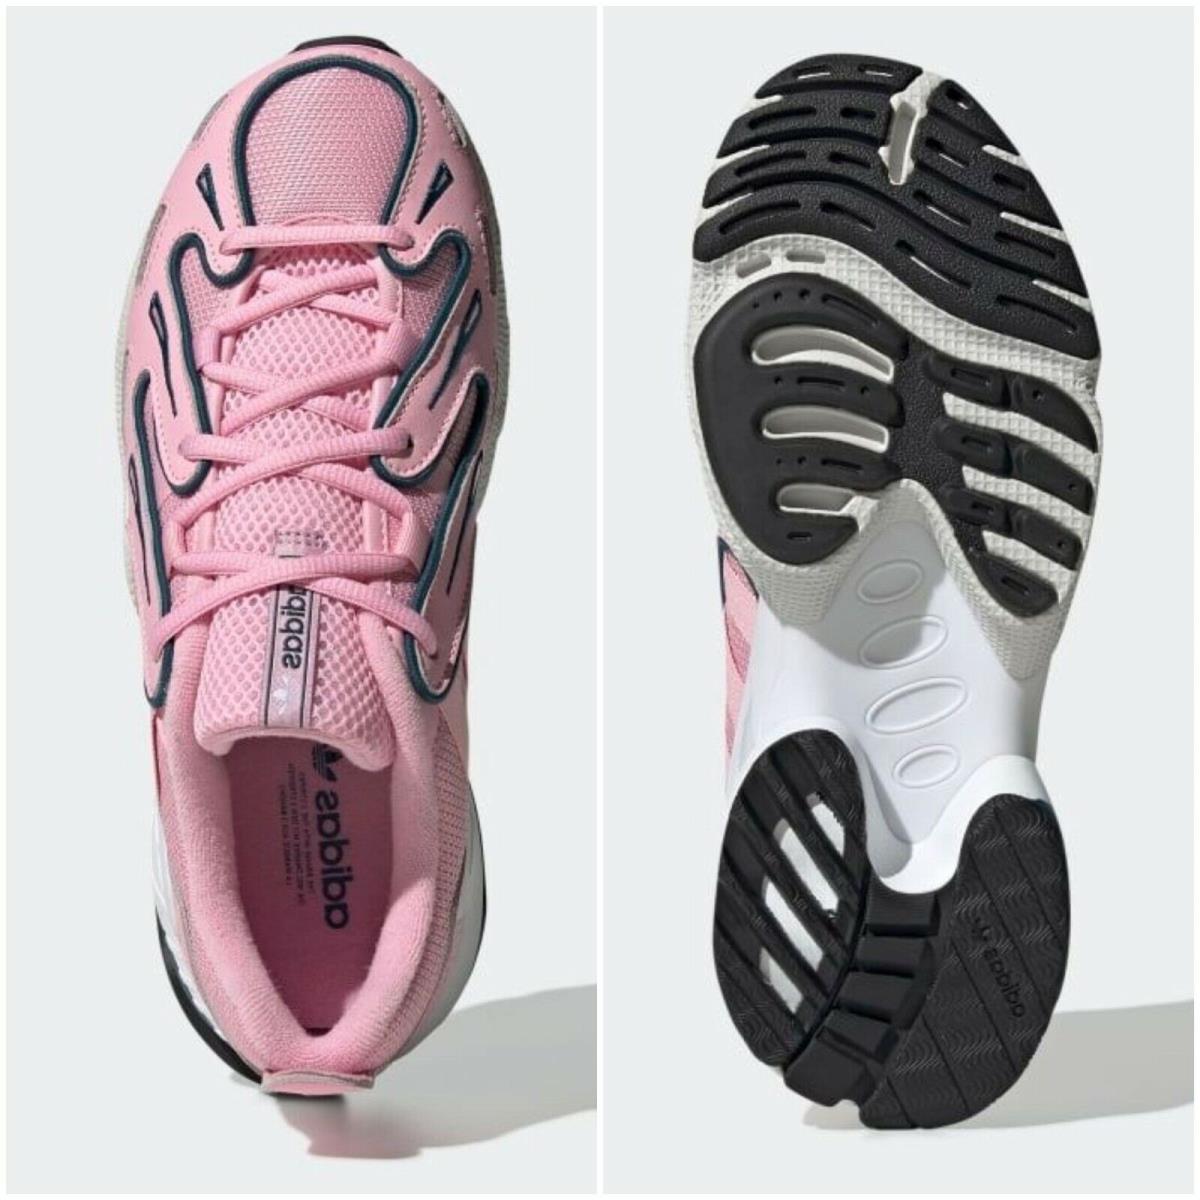 Adidas Eqt Gazelle Women`s Athletic Running Shoes Pink Size 6.5